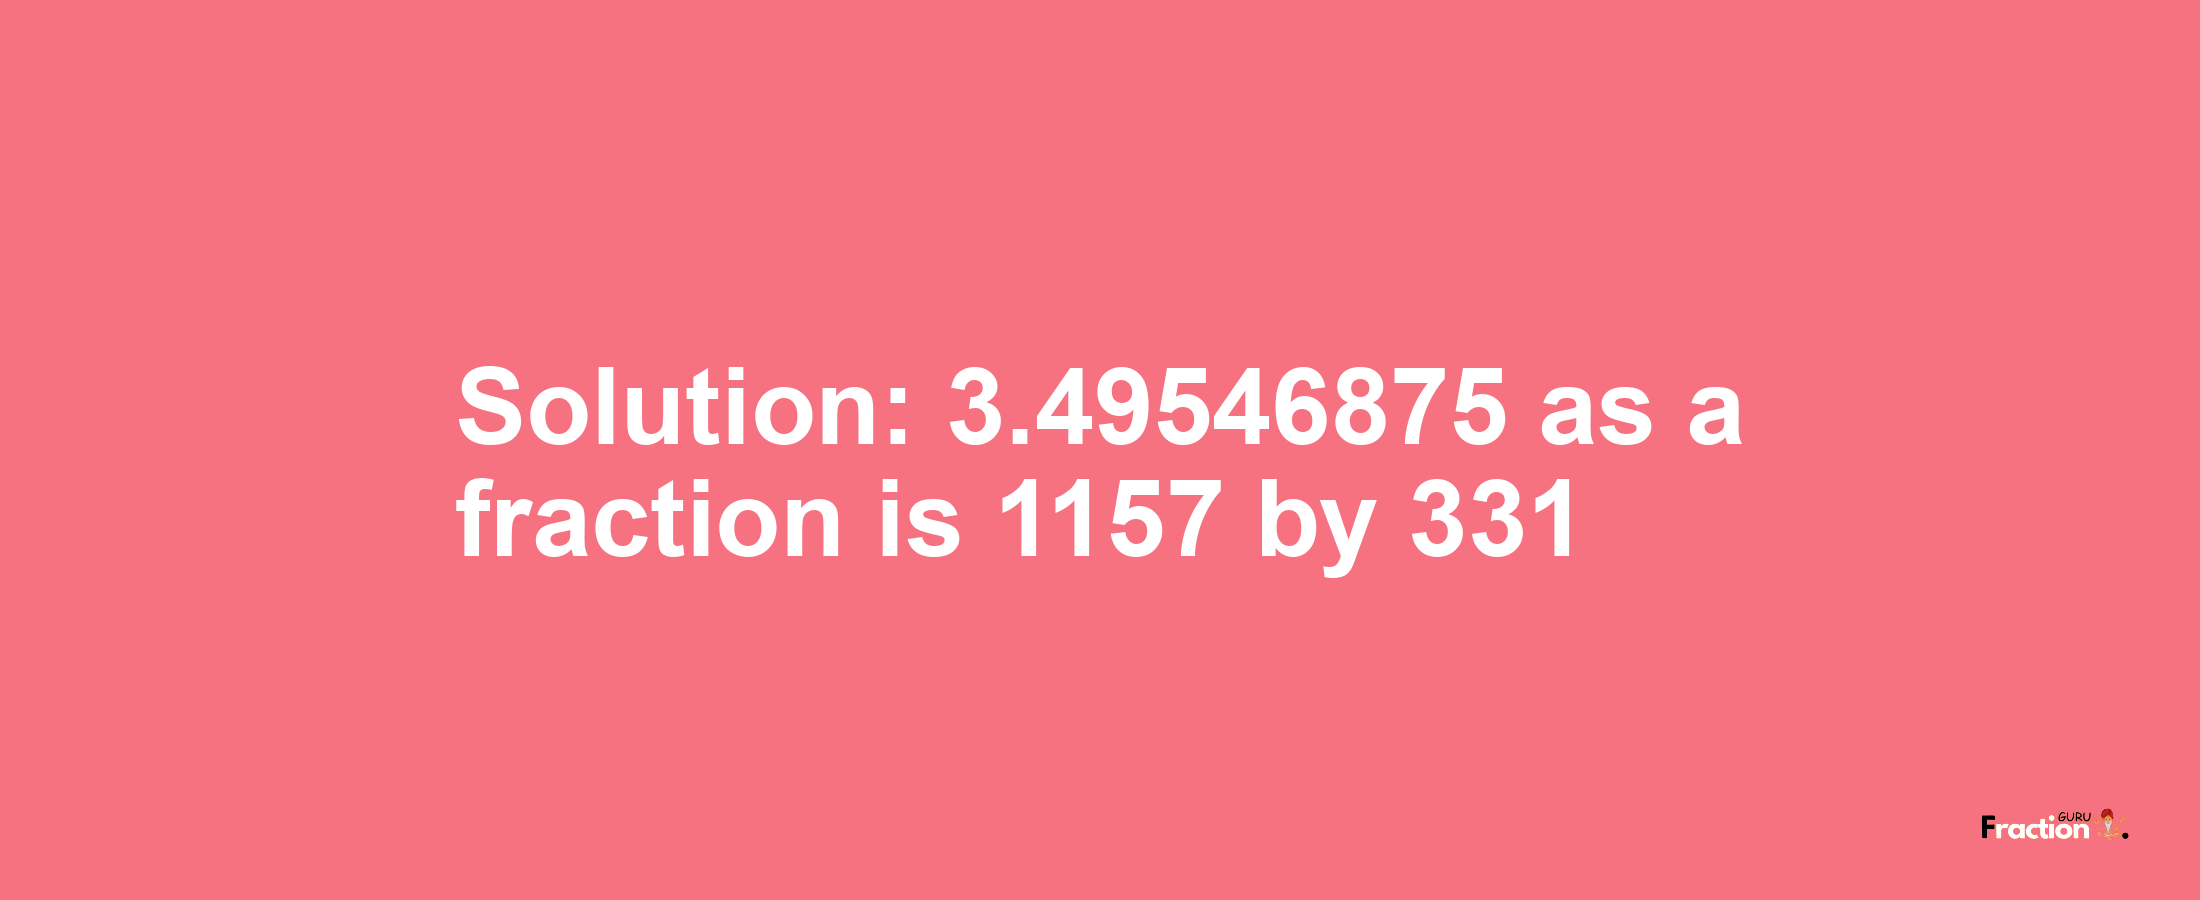 Solution:3.49546875 as a fraction is 1157/331